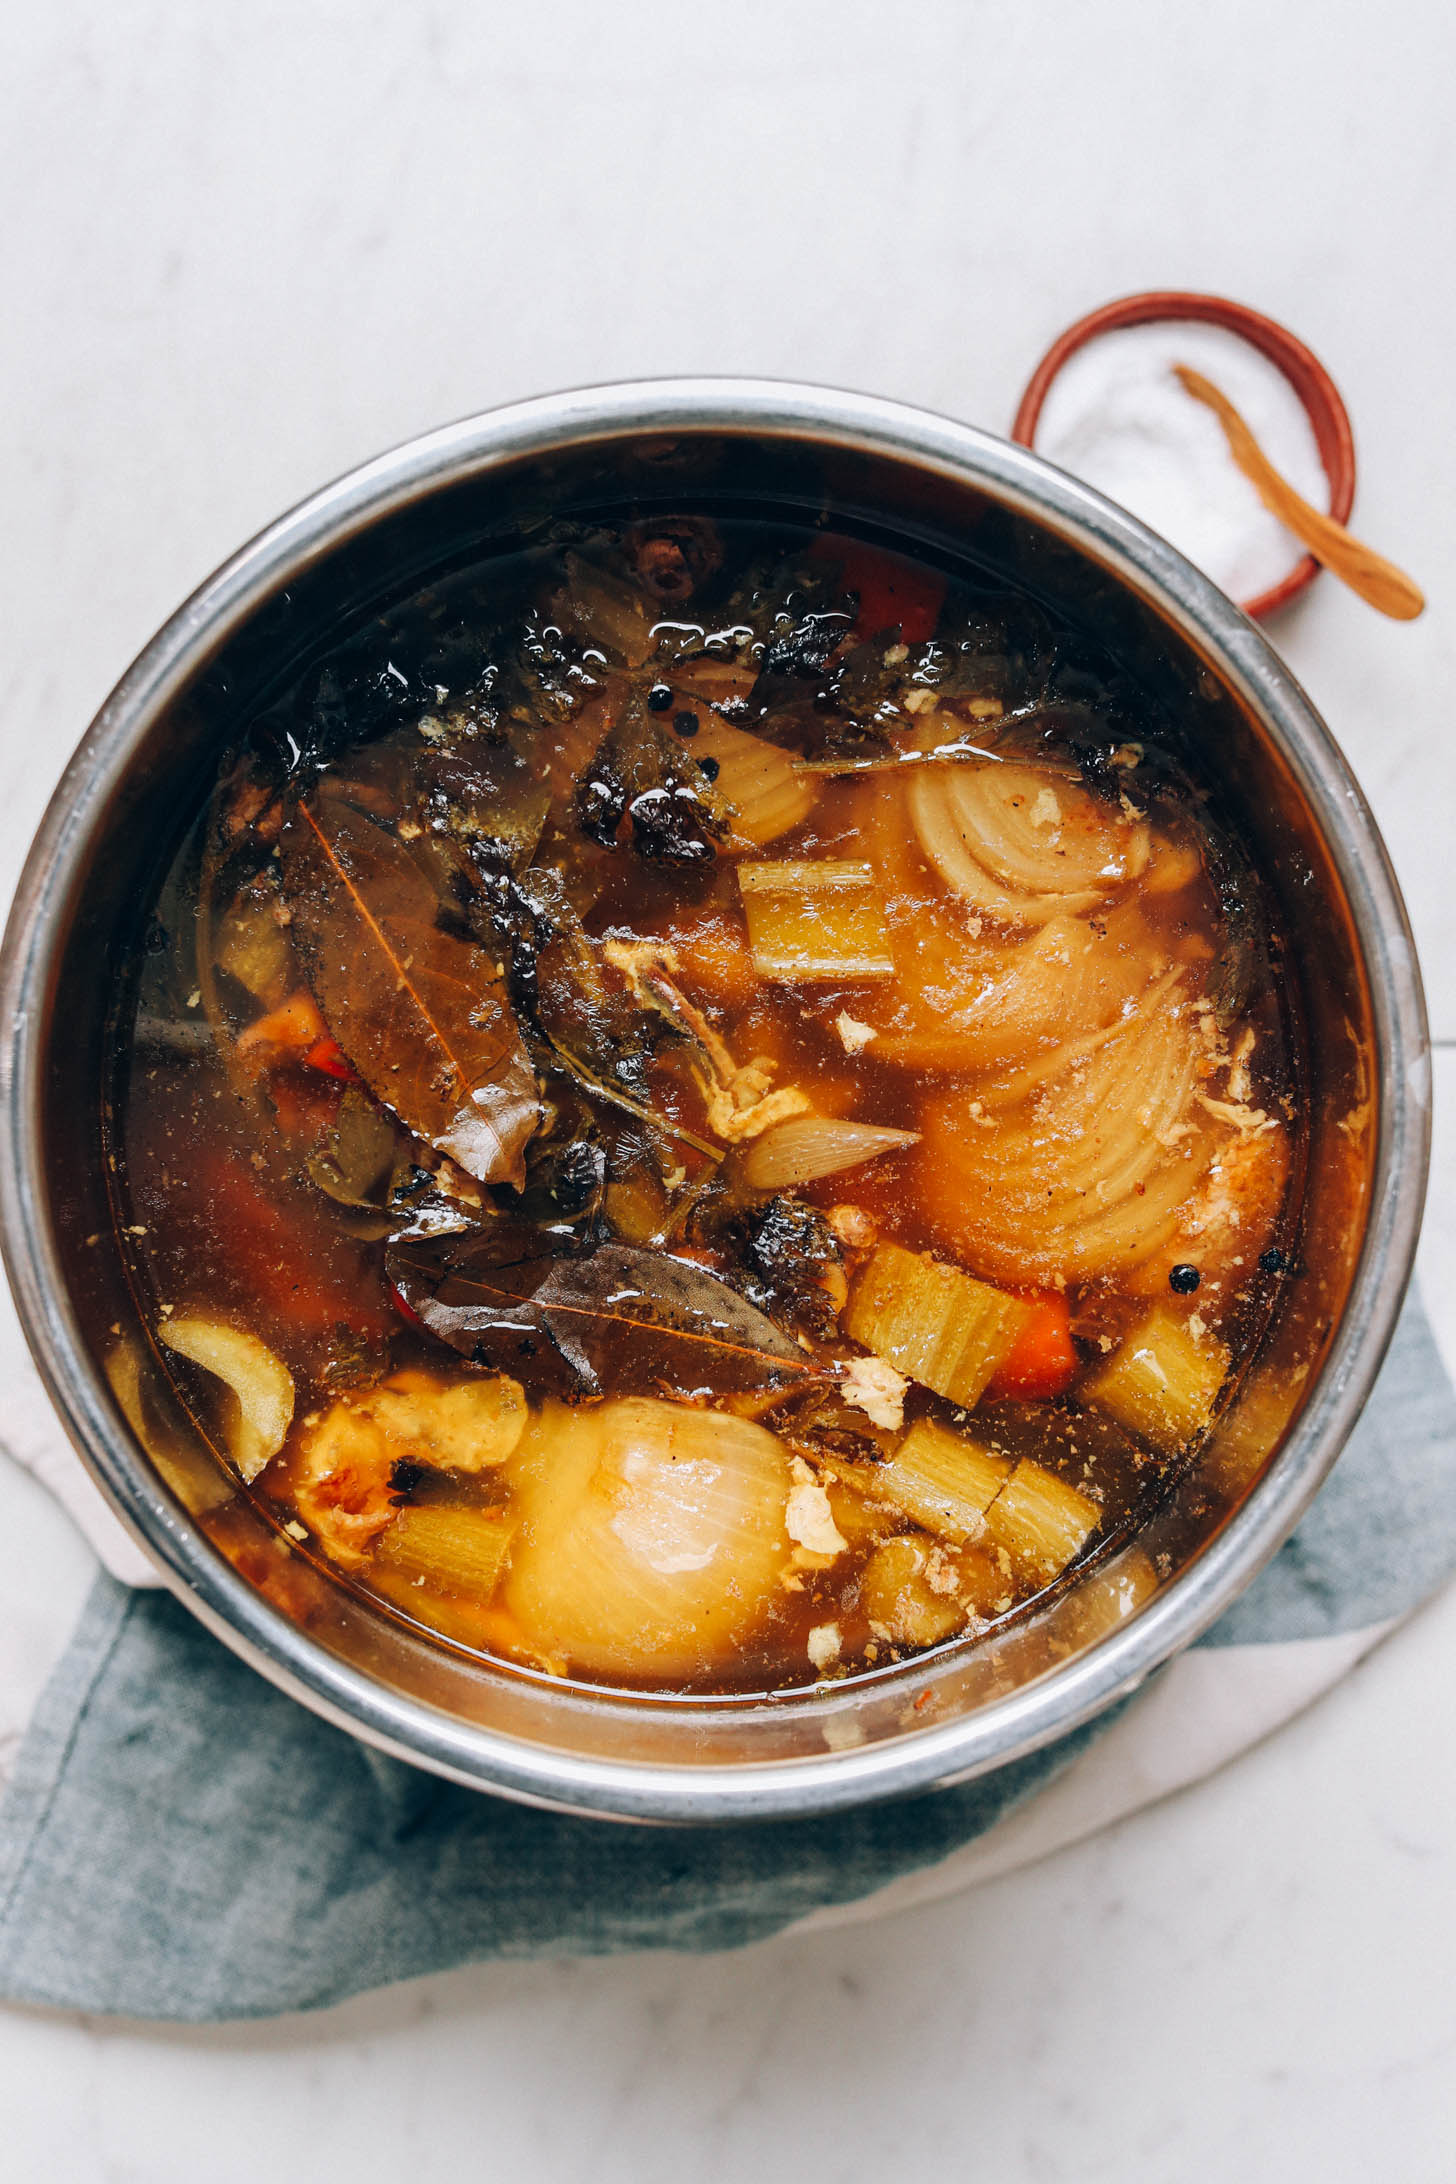 Cooked chicken stock in an Instant Pot